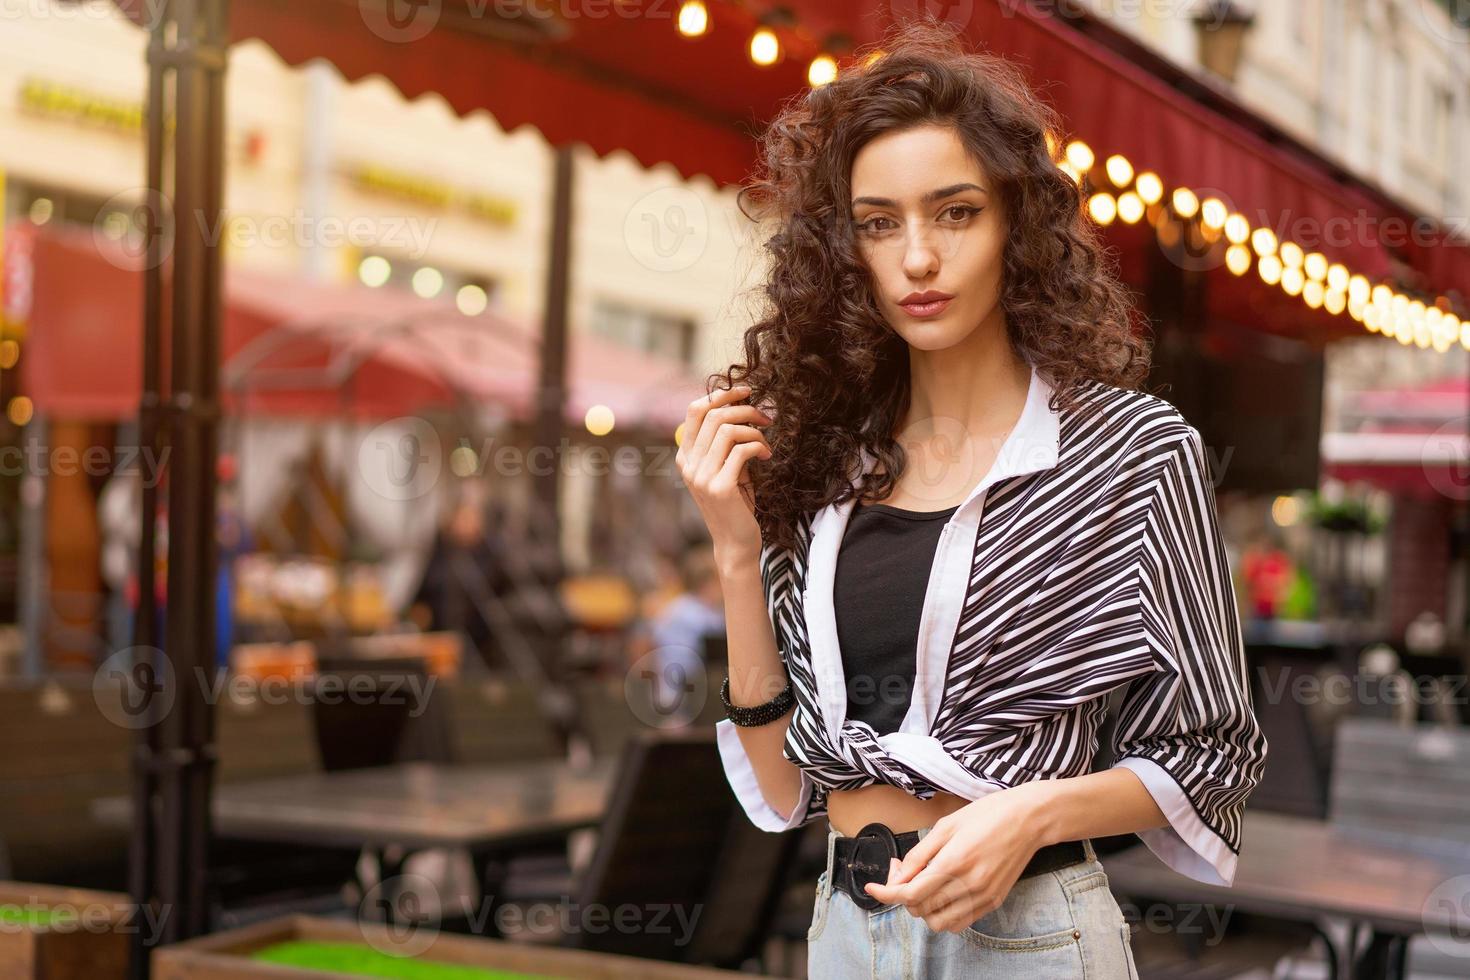 Portrait of a young beautiful woman with curly hair on the street posing for the camera photo